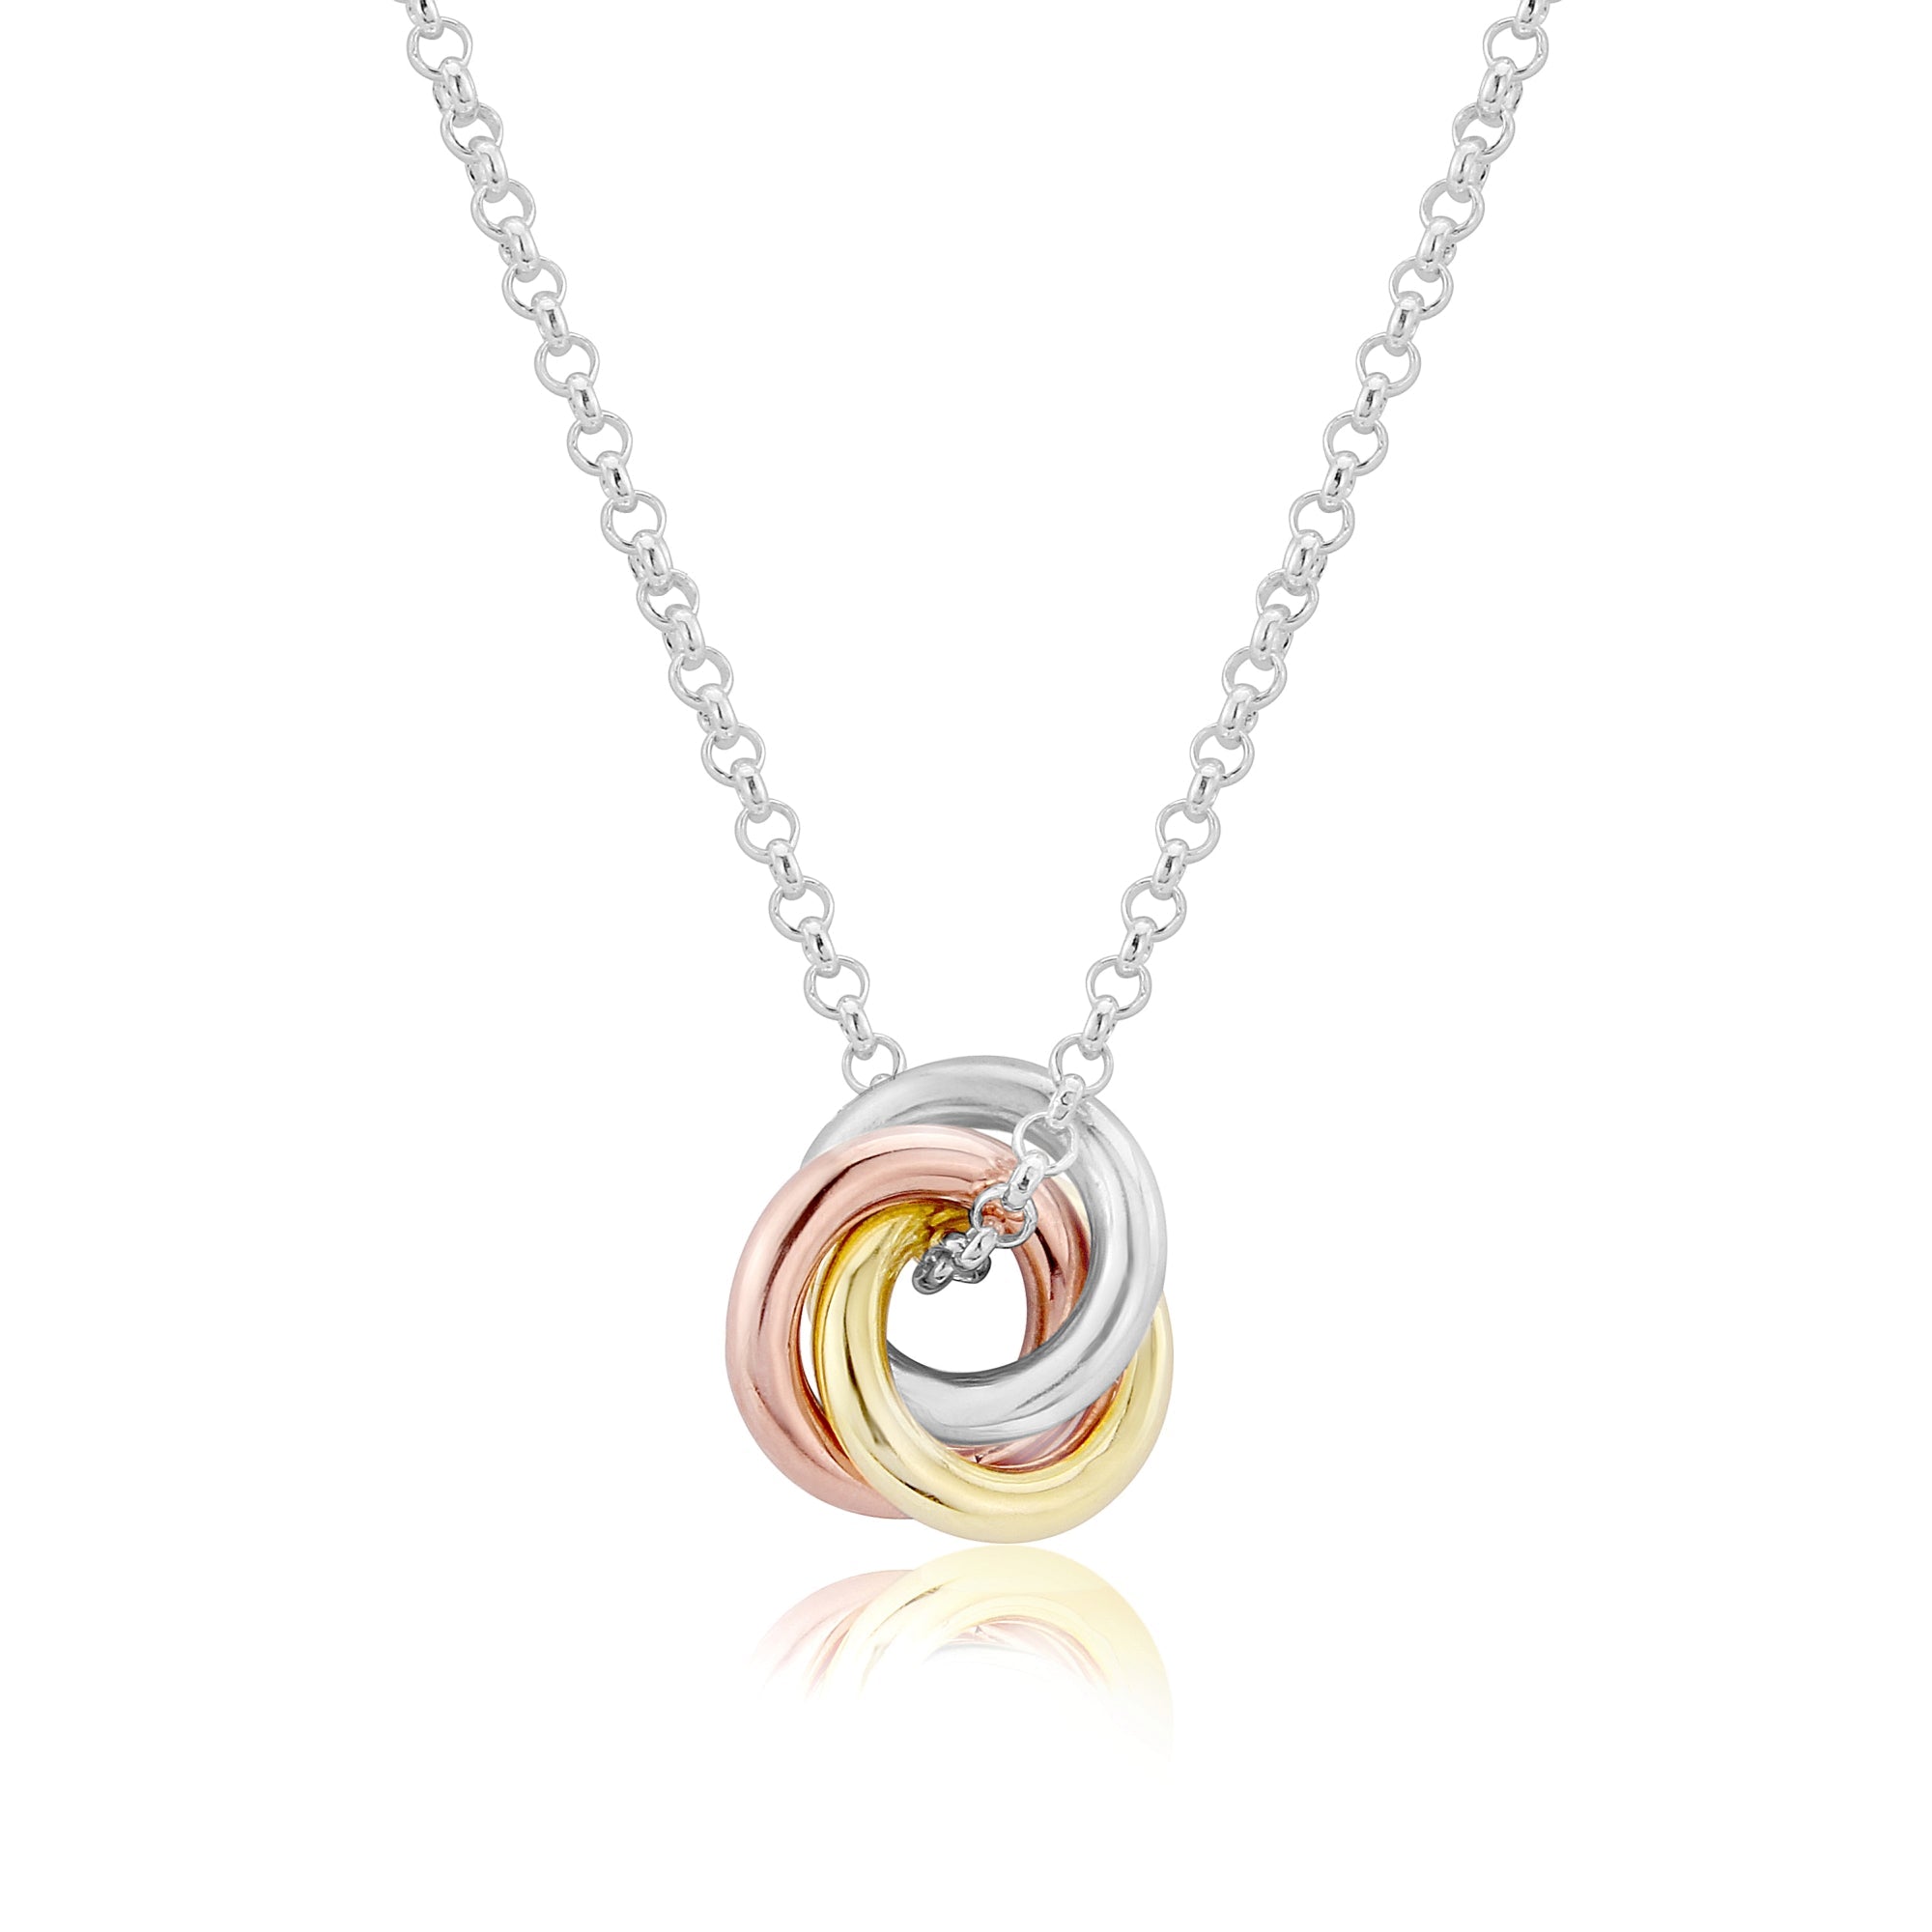 Handmade 9ct Yellow Gold, Rose Gold and Silver Round  Pendant